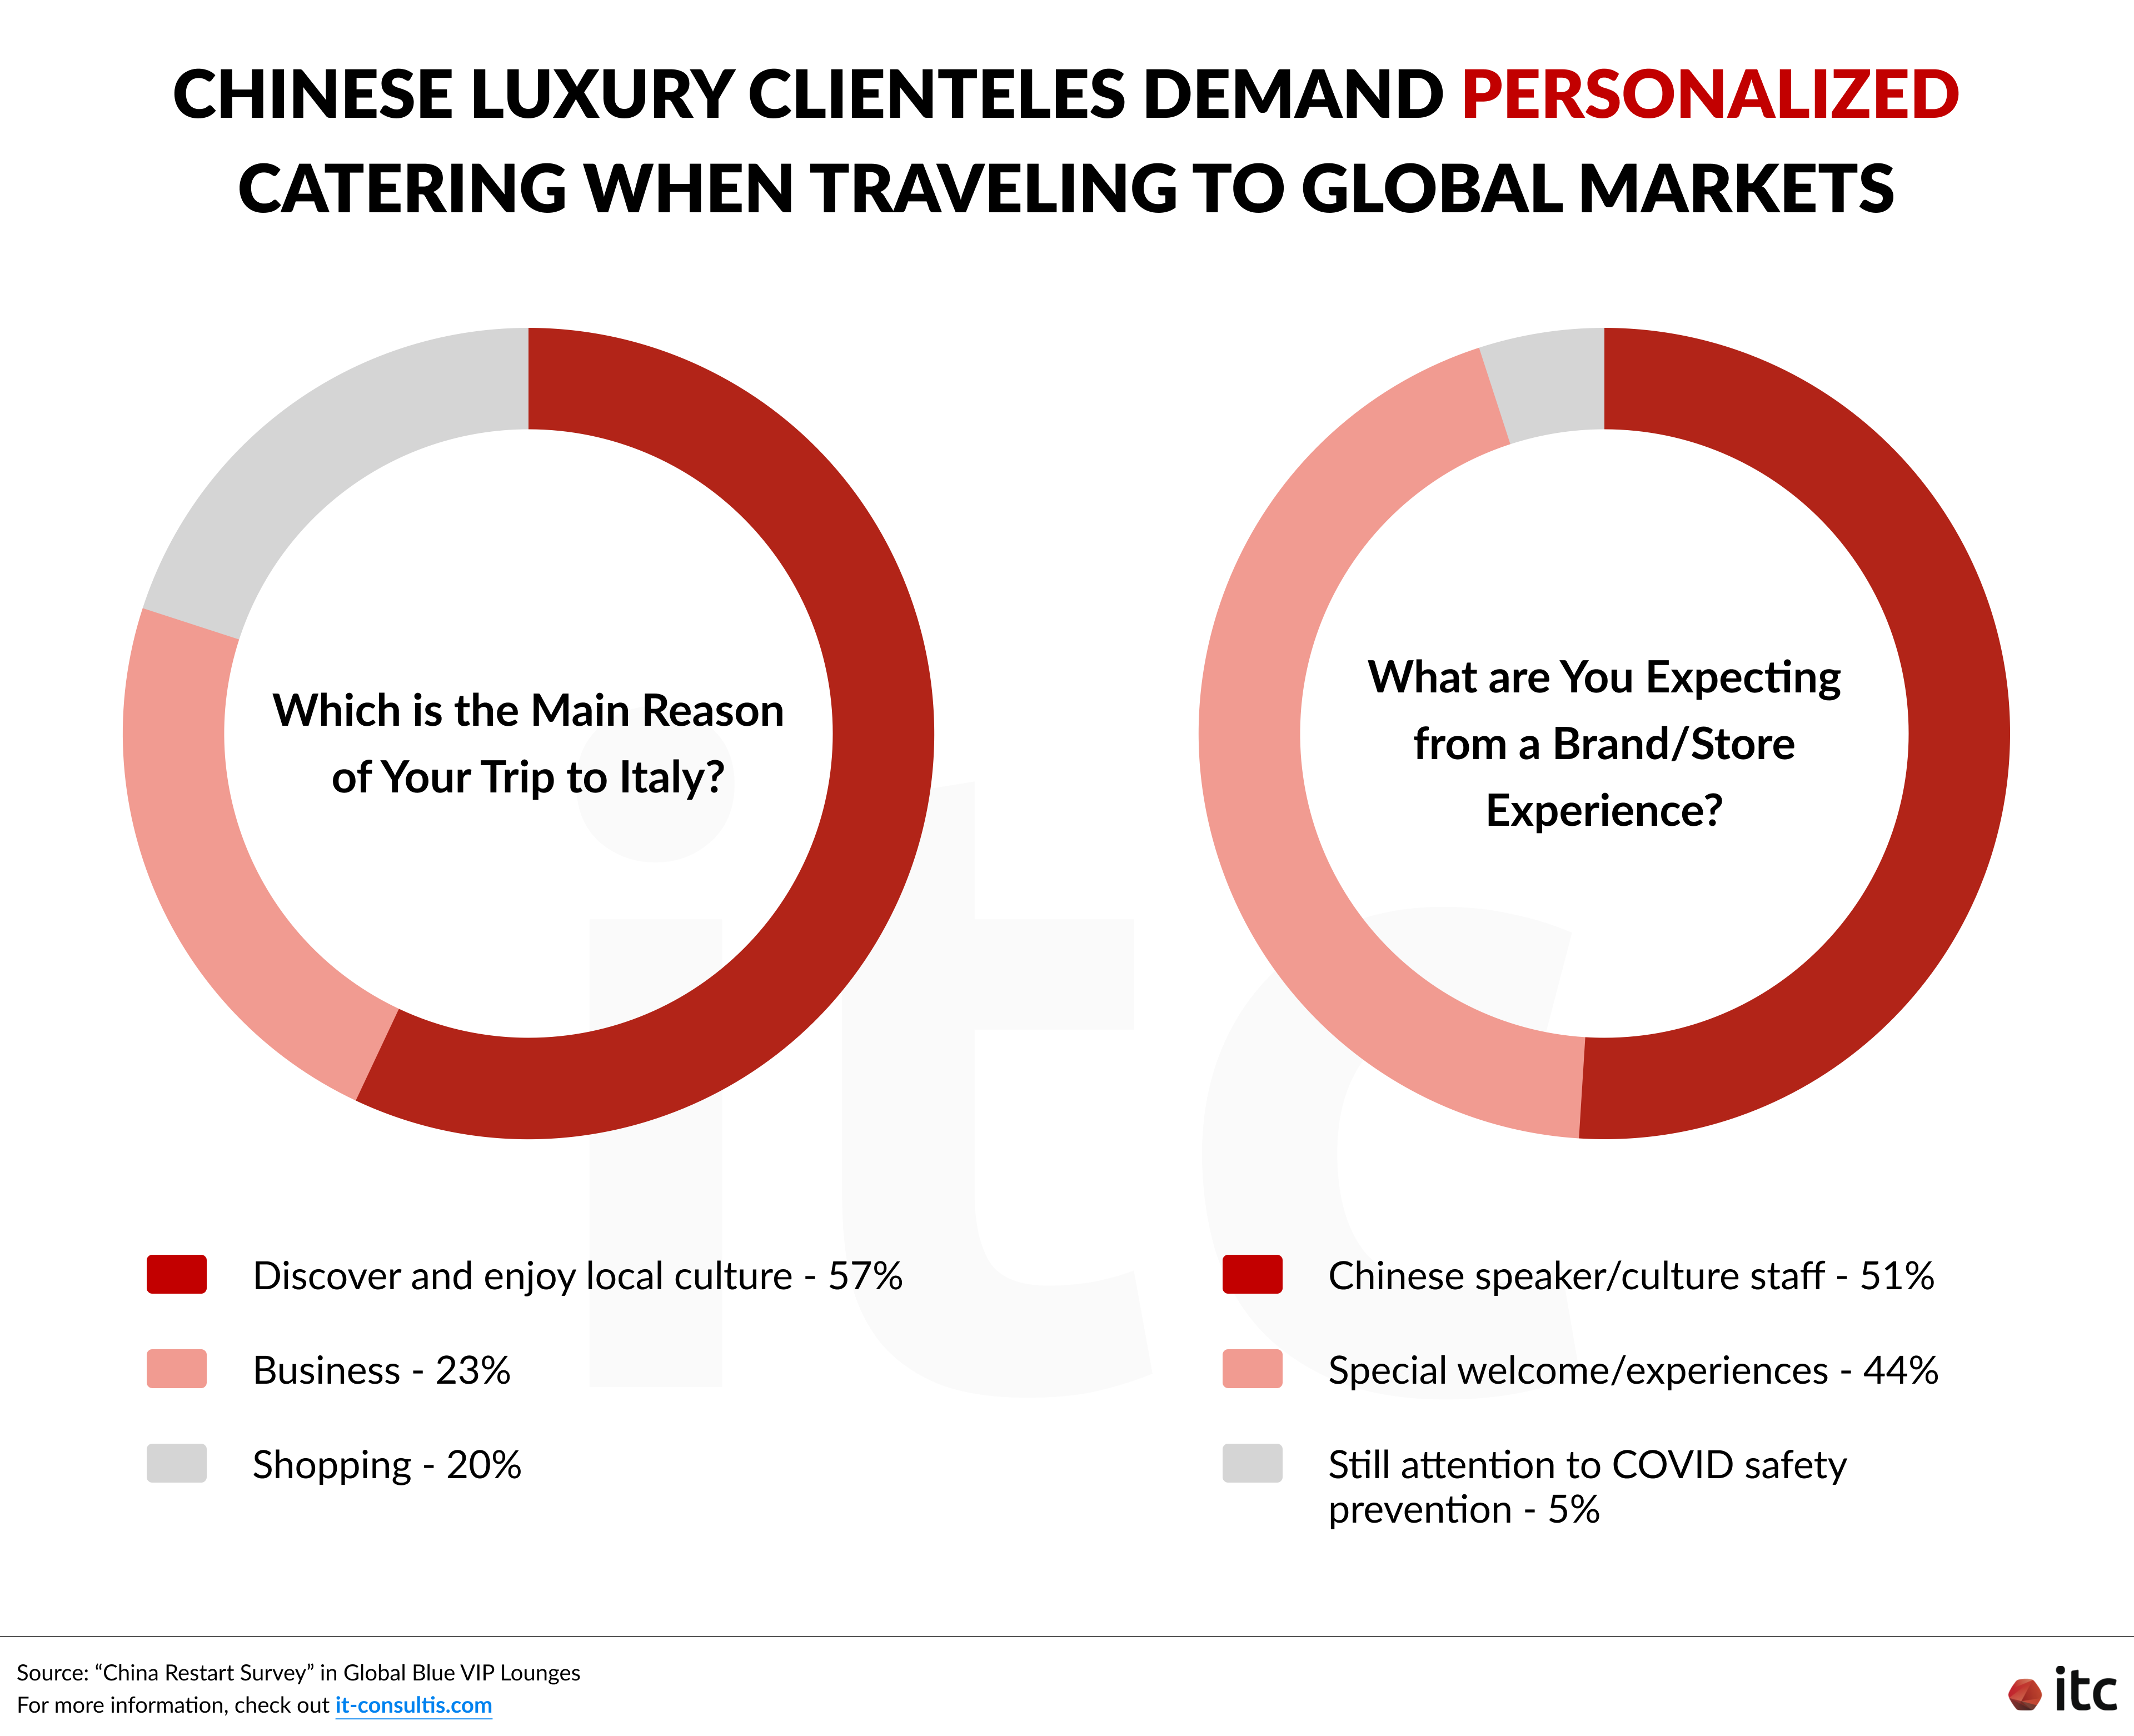 Chinese luxury clienteles demand personalized catering when traveling to global markets